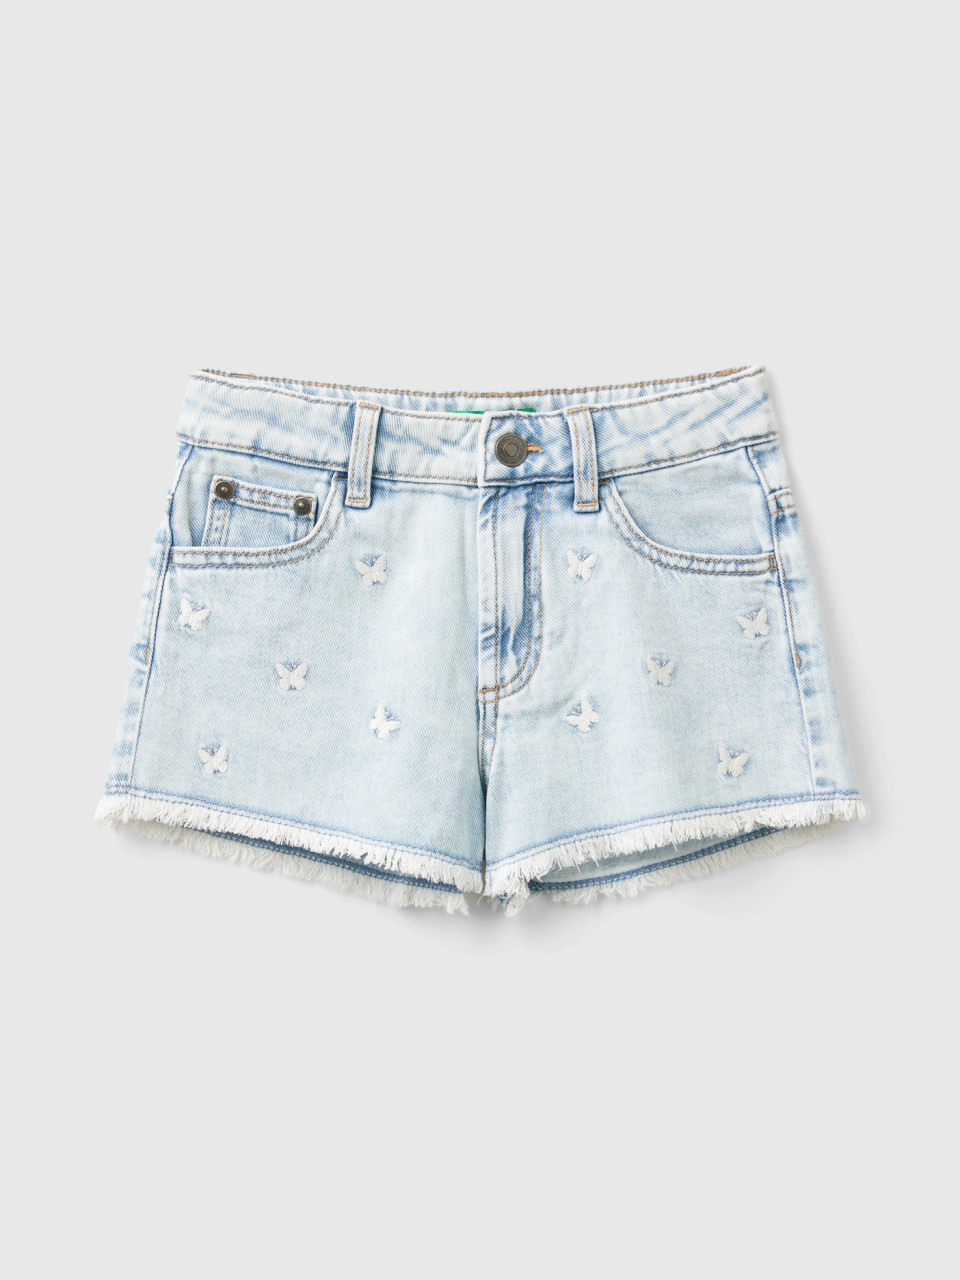 Benetton, Denim Shorts With Butterfly Embroidery, Sky Blue, Kids